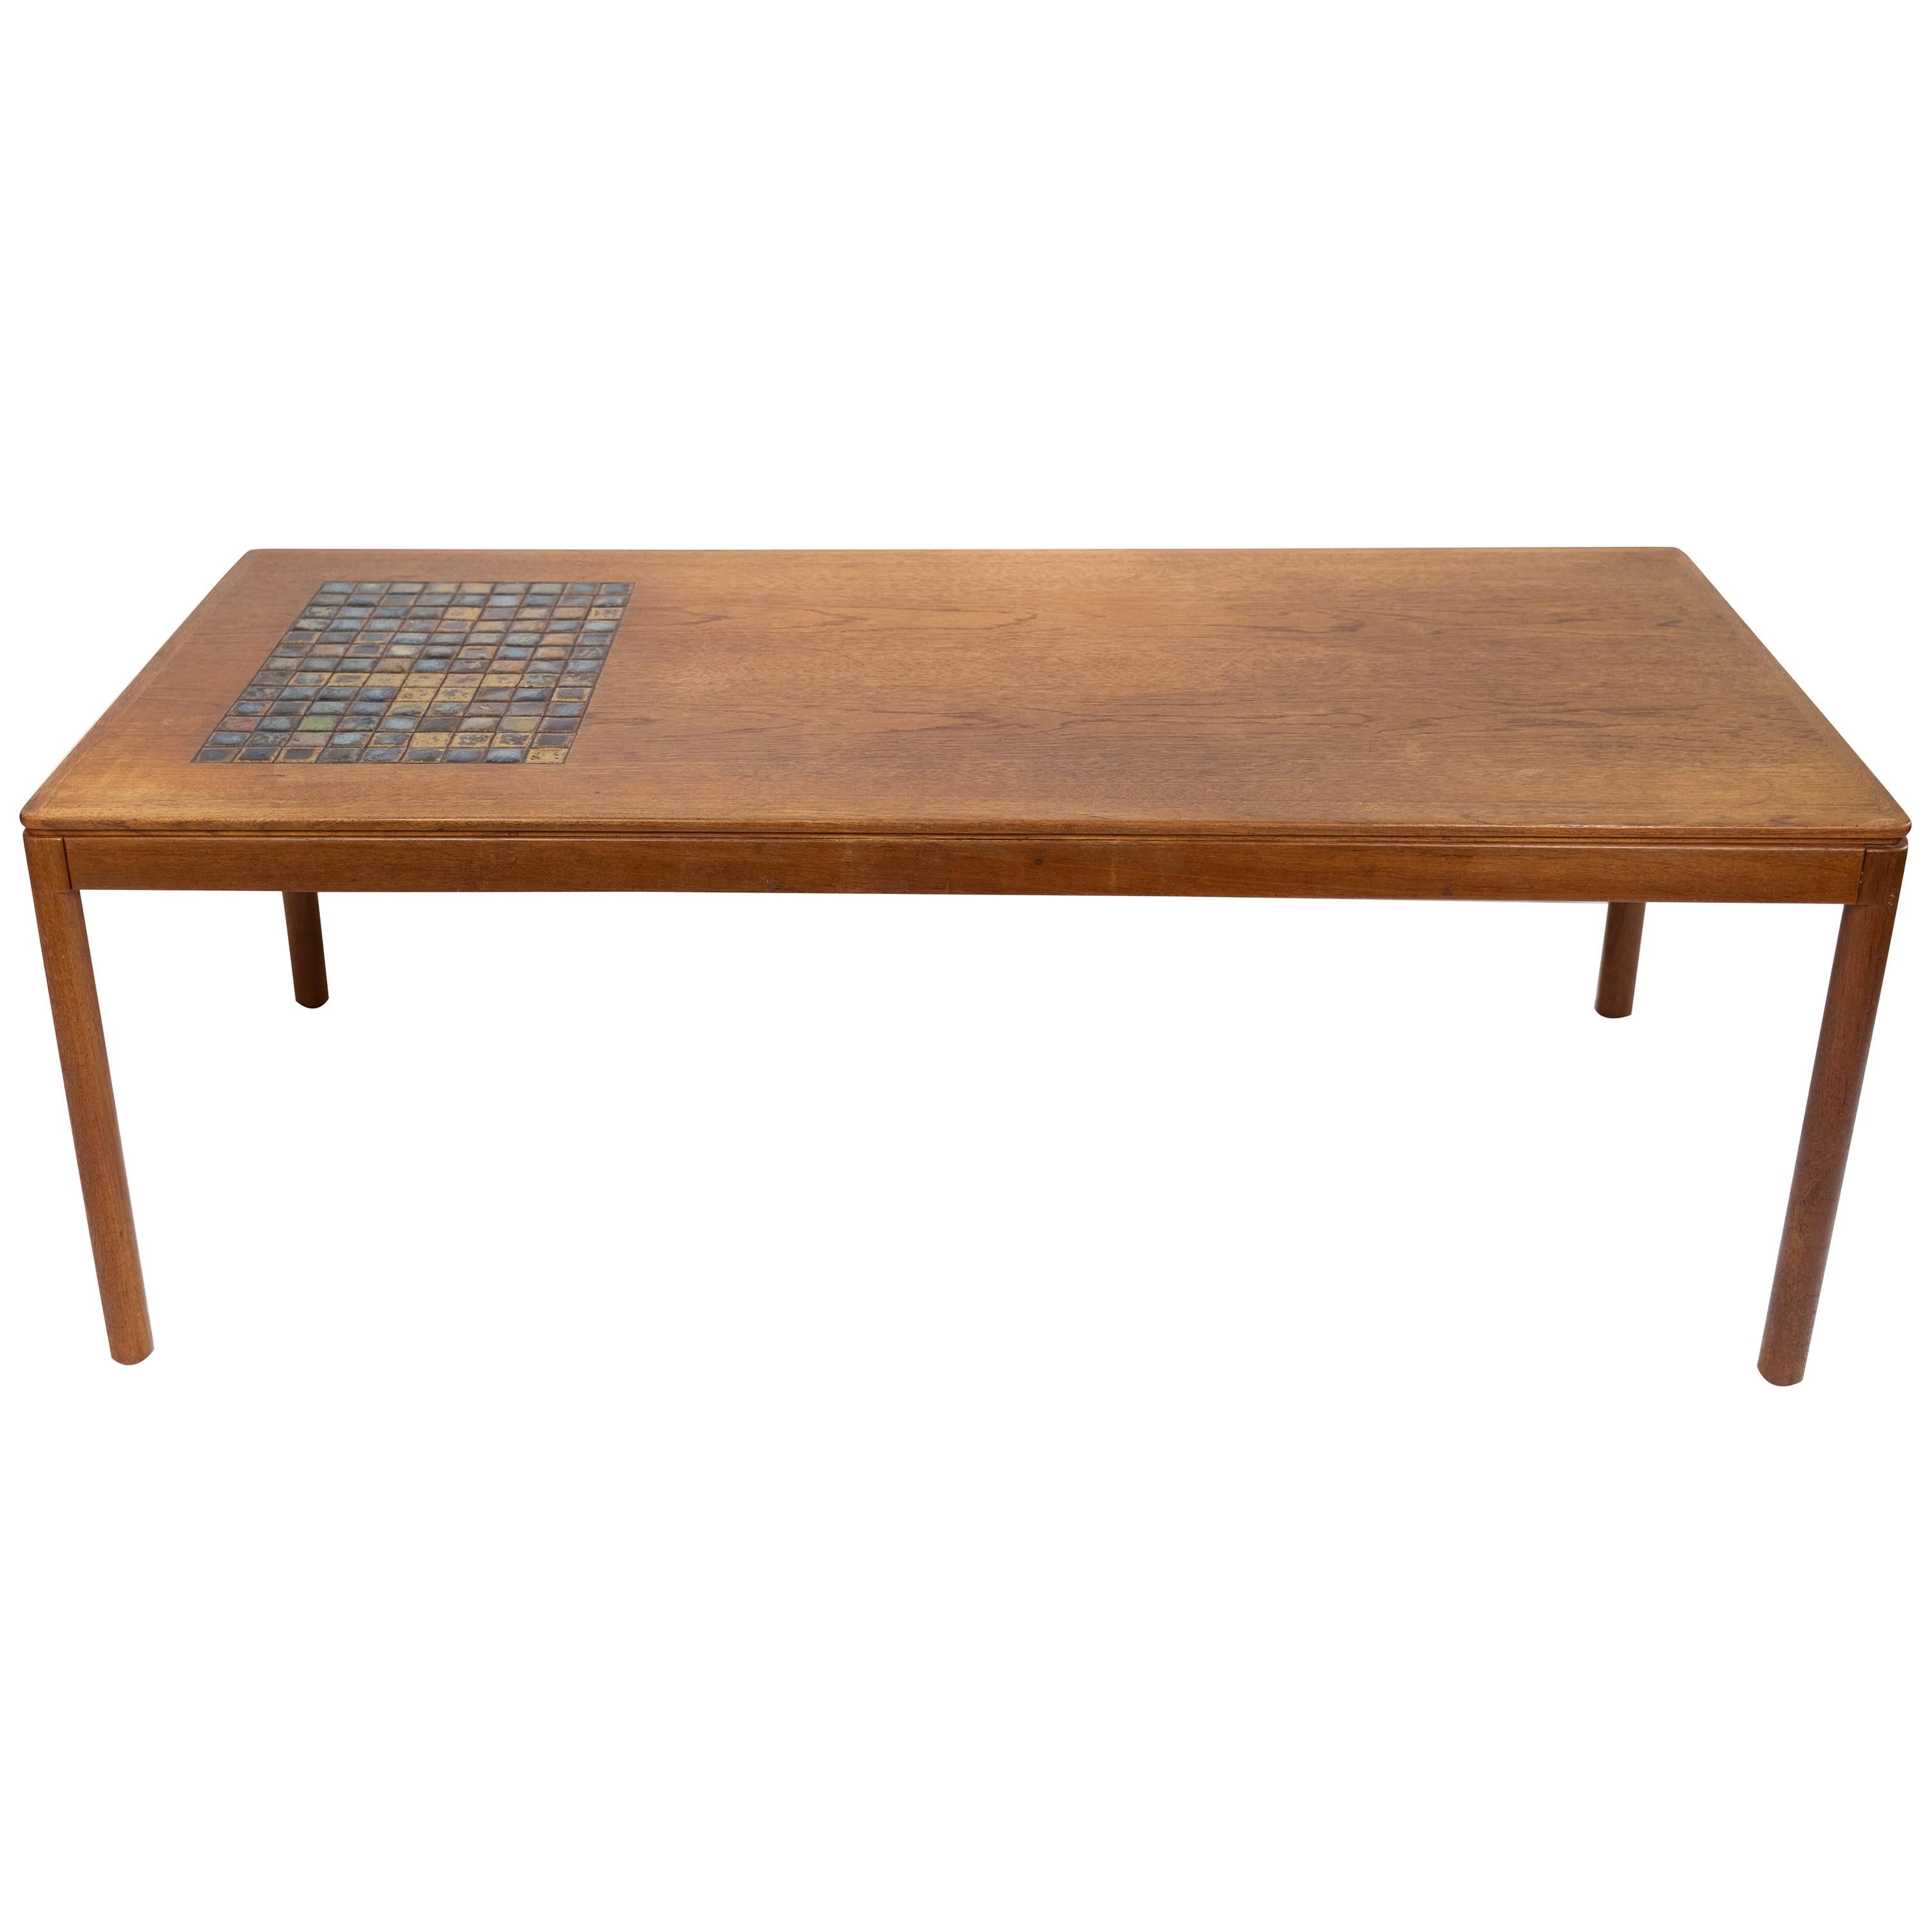 Coffee Table in Teak with Brown Ceramic Tiles of Danish Design from the 1960s For Sale